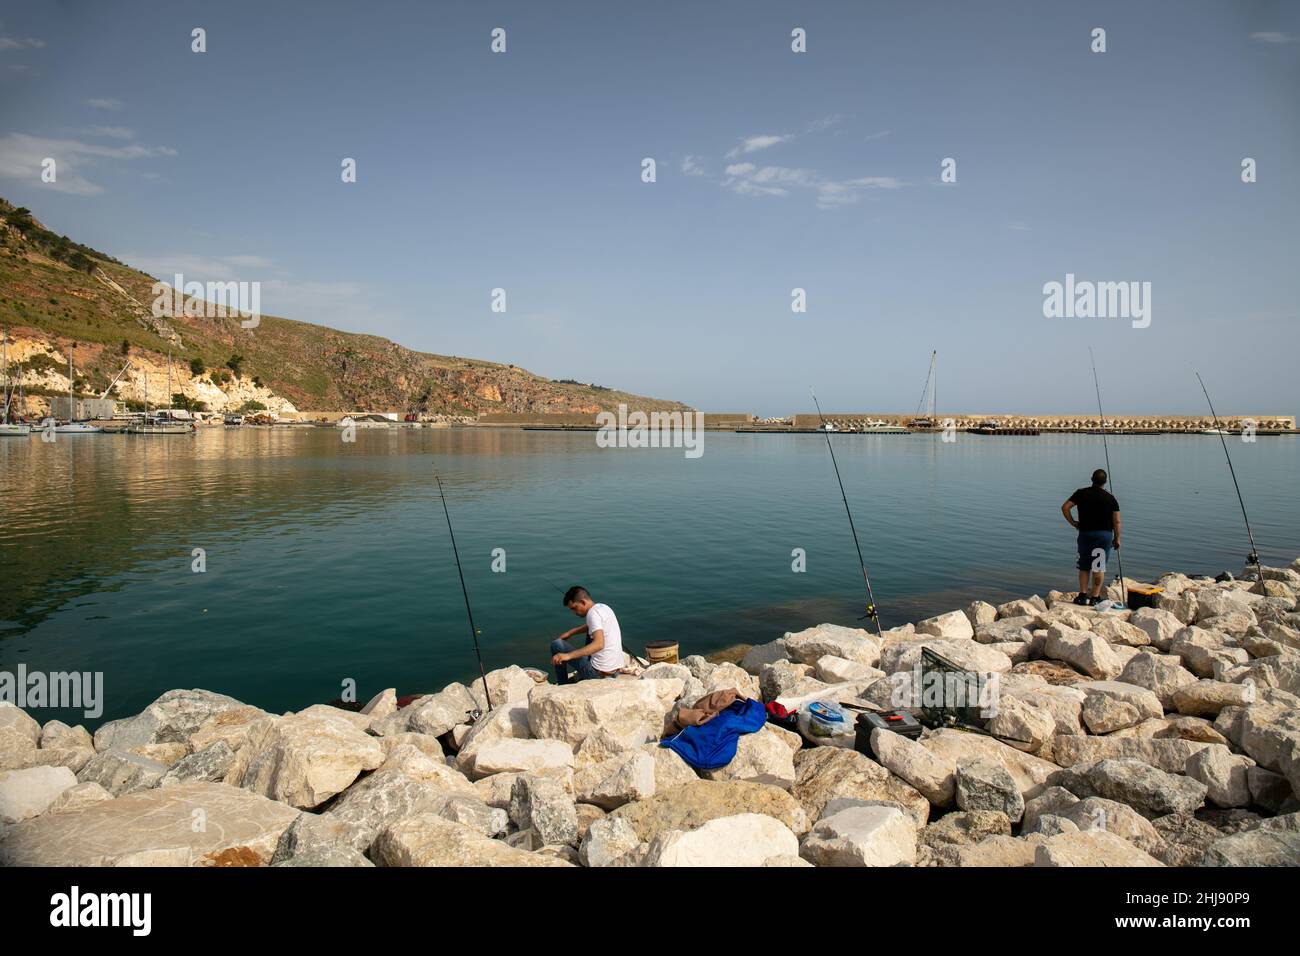 Castellammare del Golfo, Trapani province, Sicily, Italy - May 5 2021: Scenic view of the marina with two fishermen with fishing rods Stock Photo